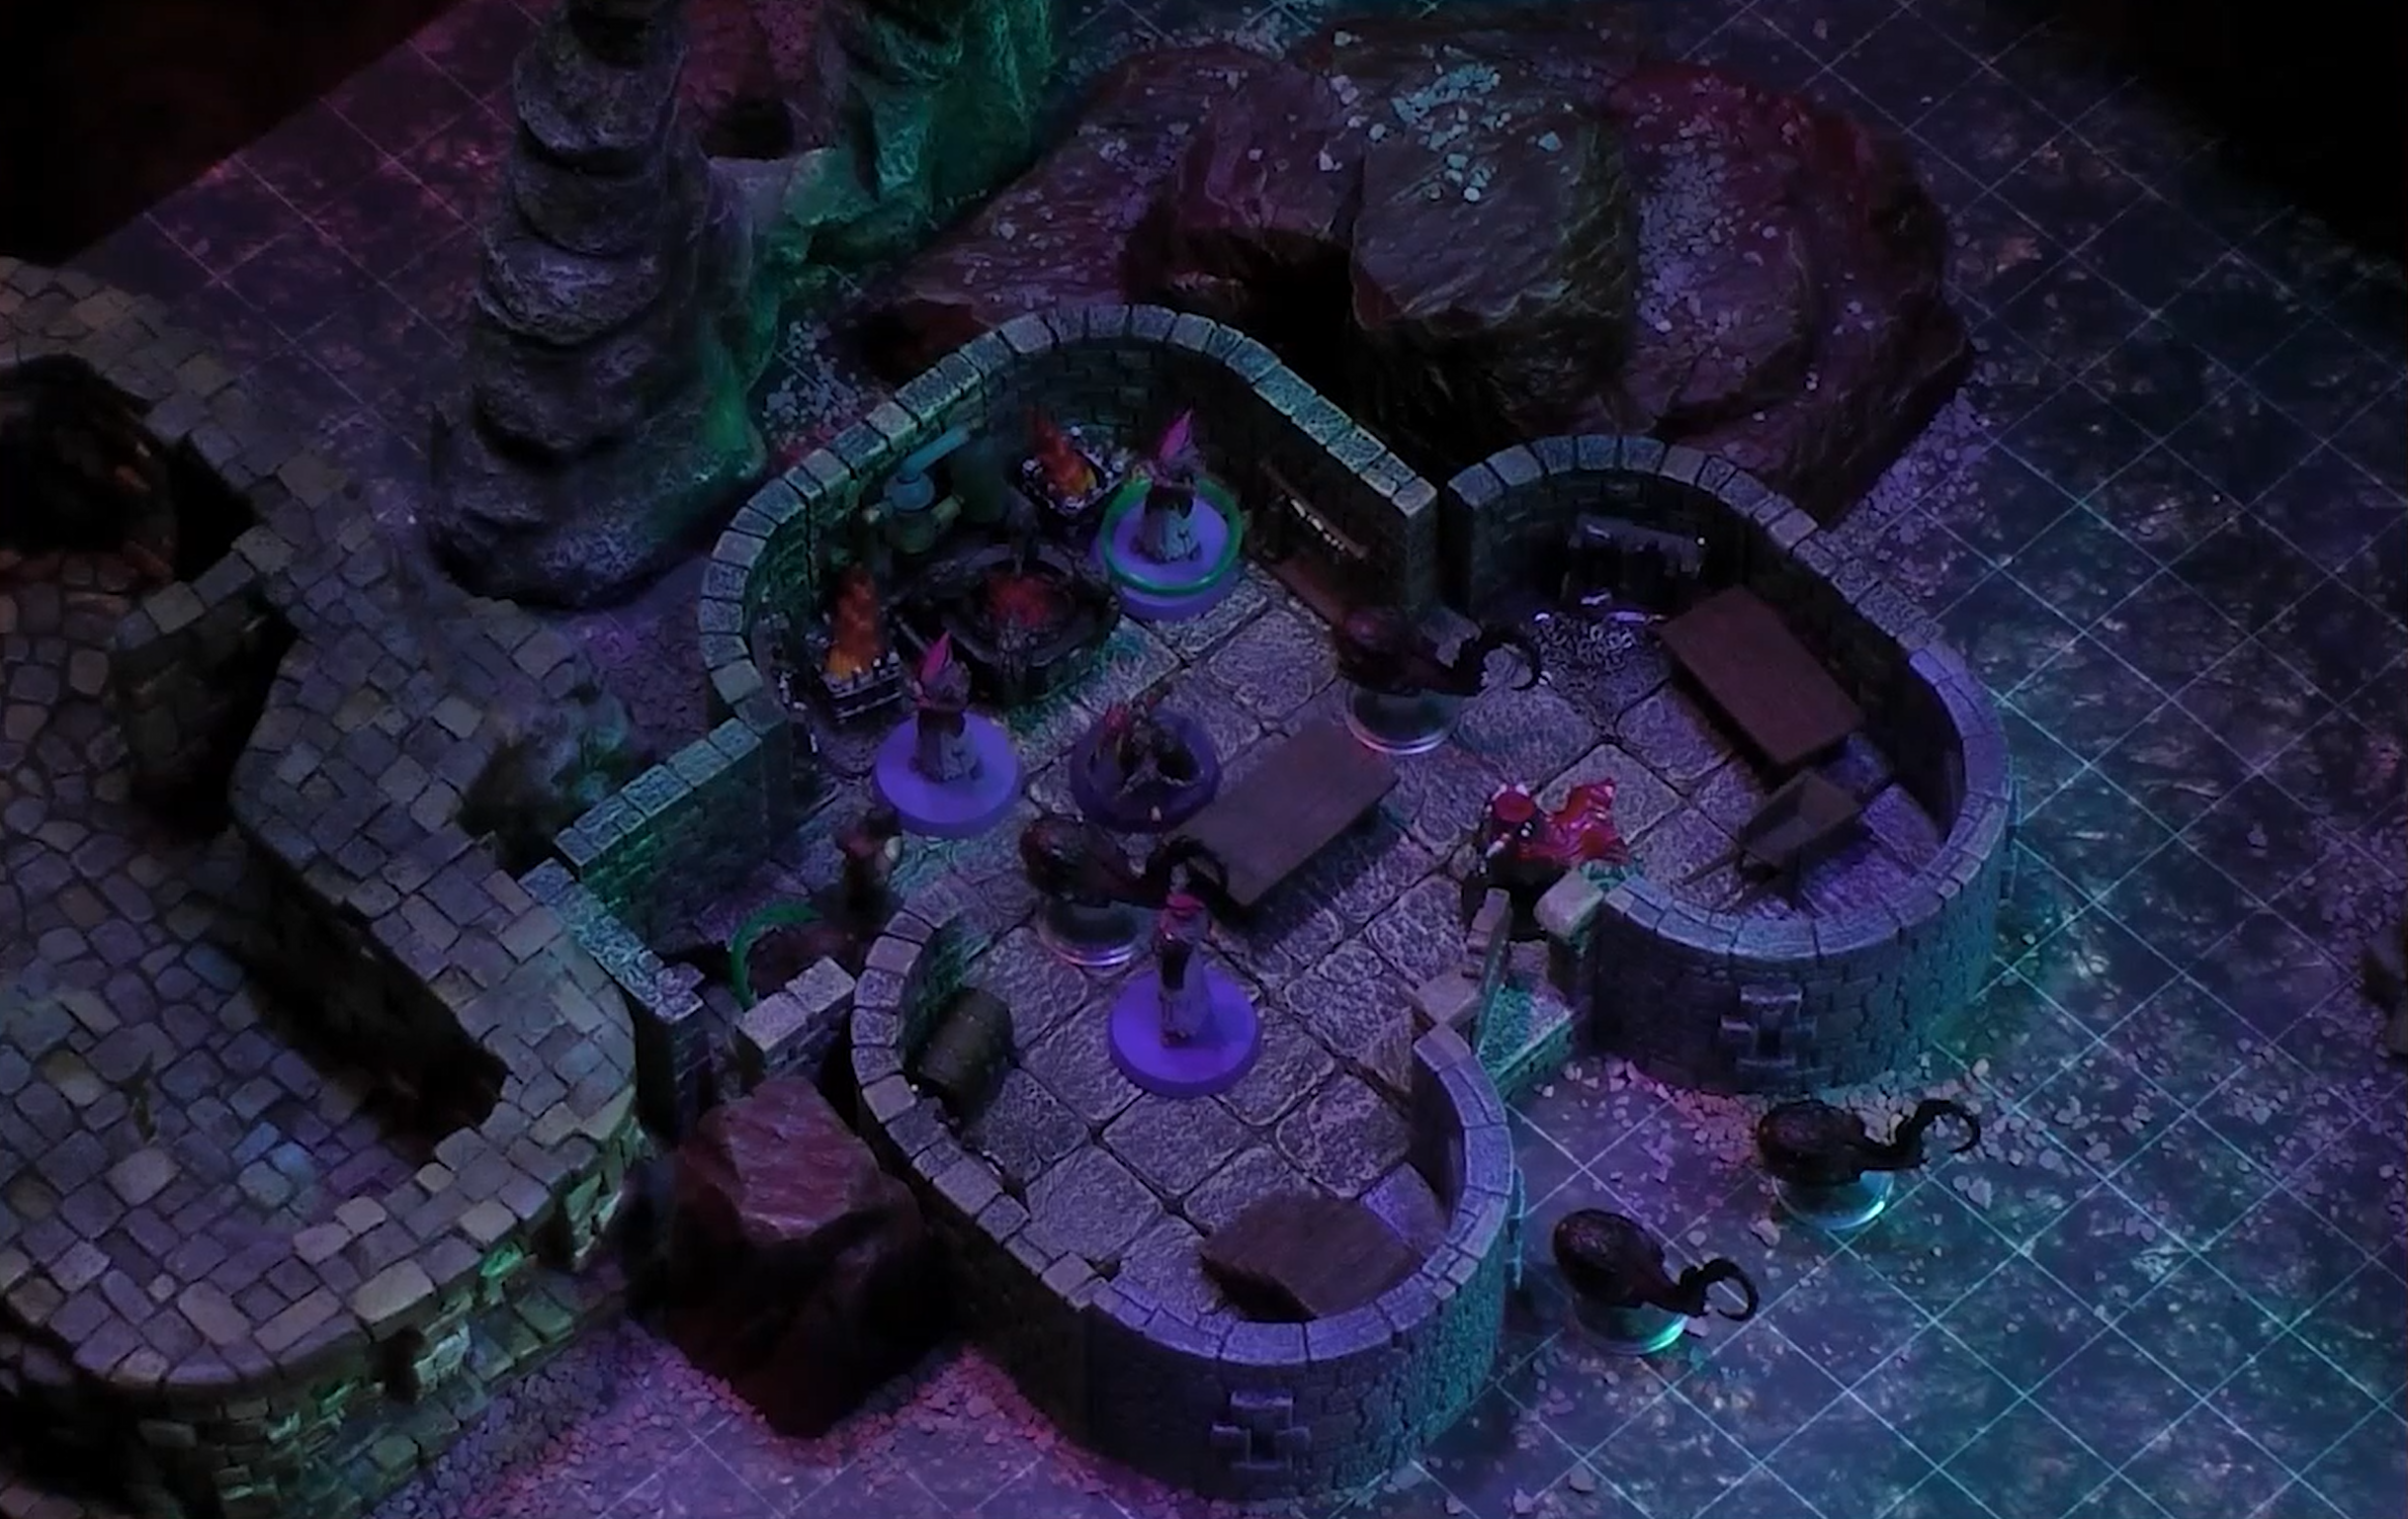 A battlemap of a stone building containing a forge. Two Reilorans, one of which has a green ring around it, are by the forge. Another Reiloran and a red-caped individual are near the entance. Three Slithers are in the building, and two are outside.